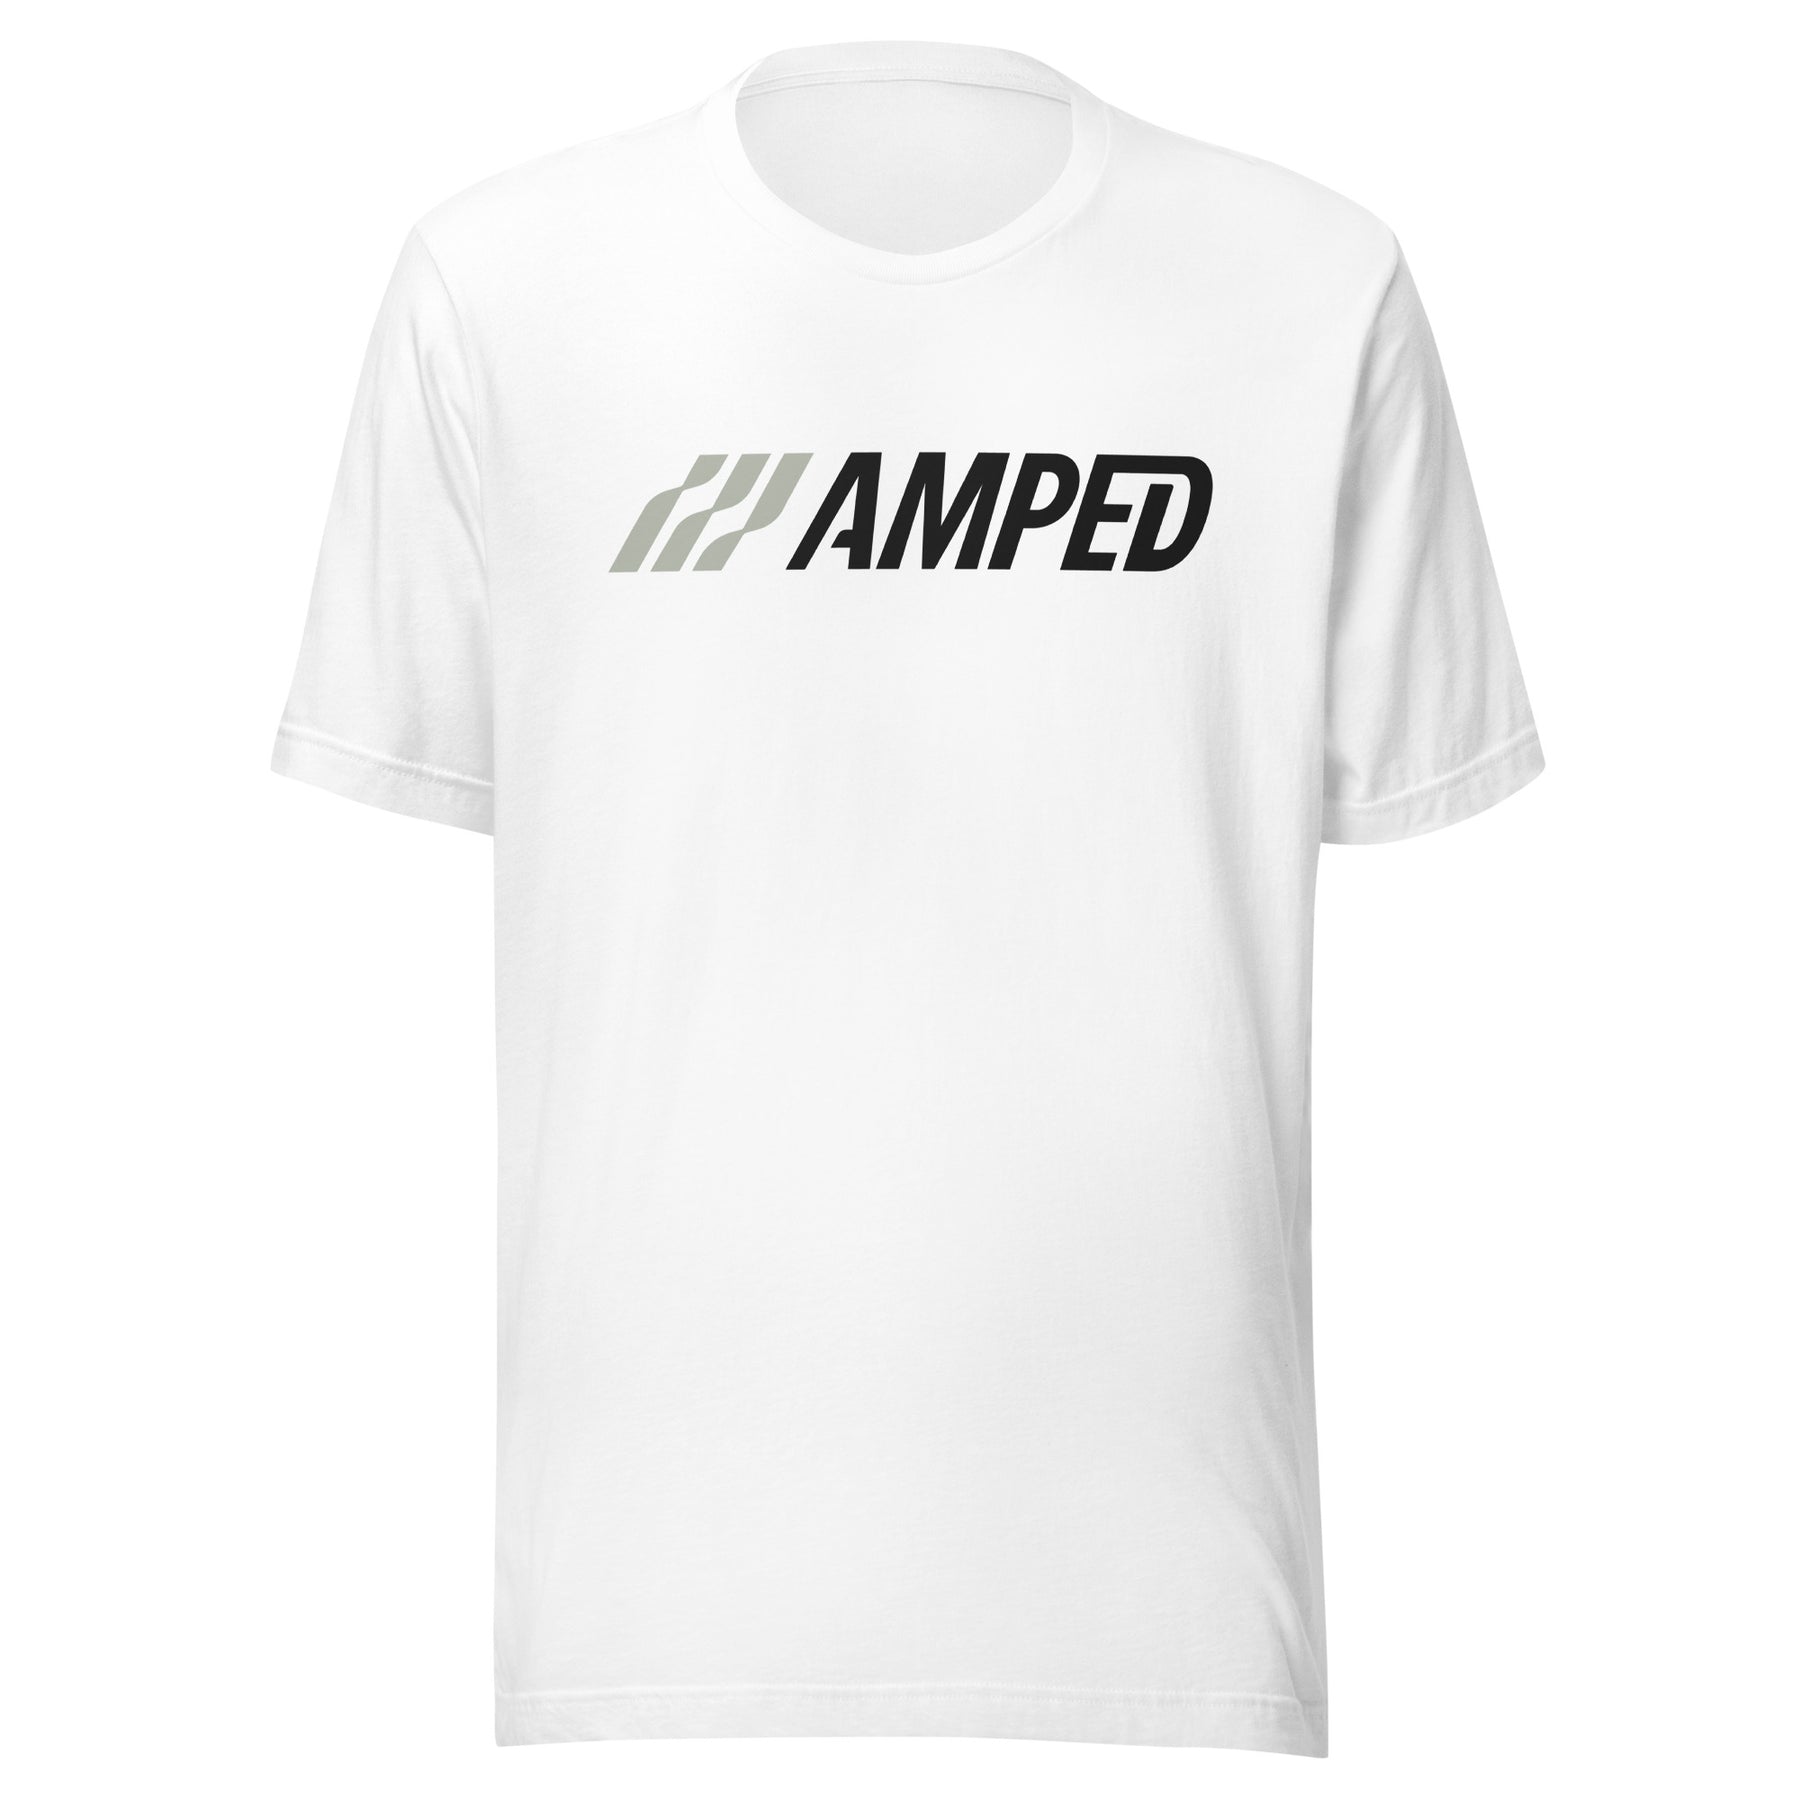 The Amped Tee 1